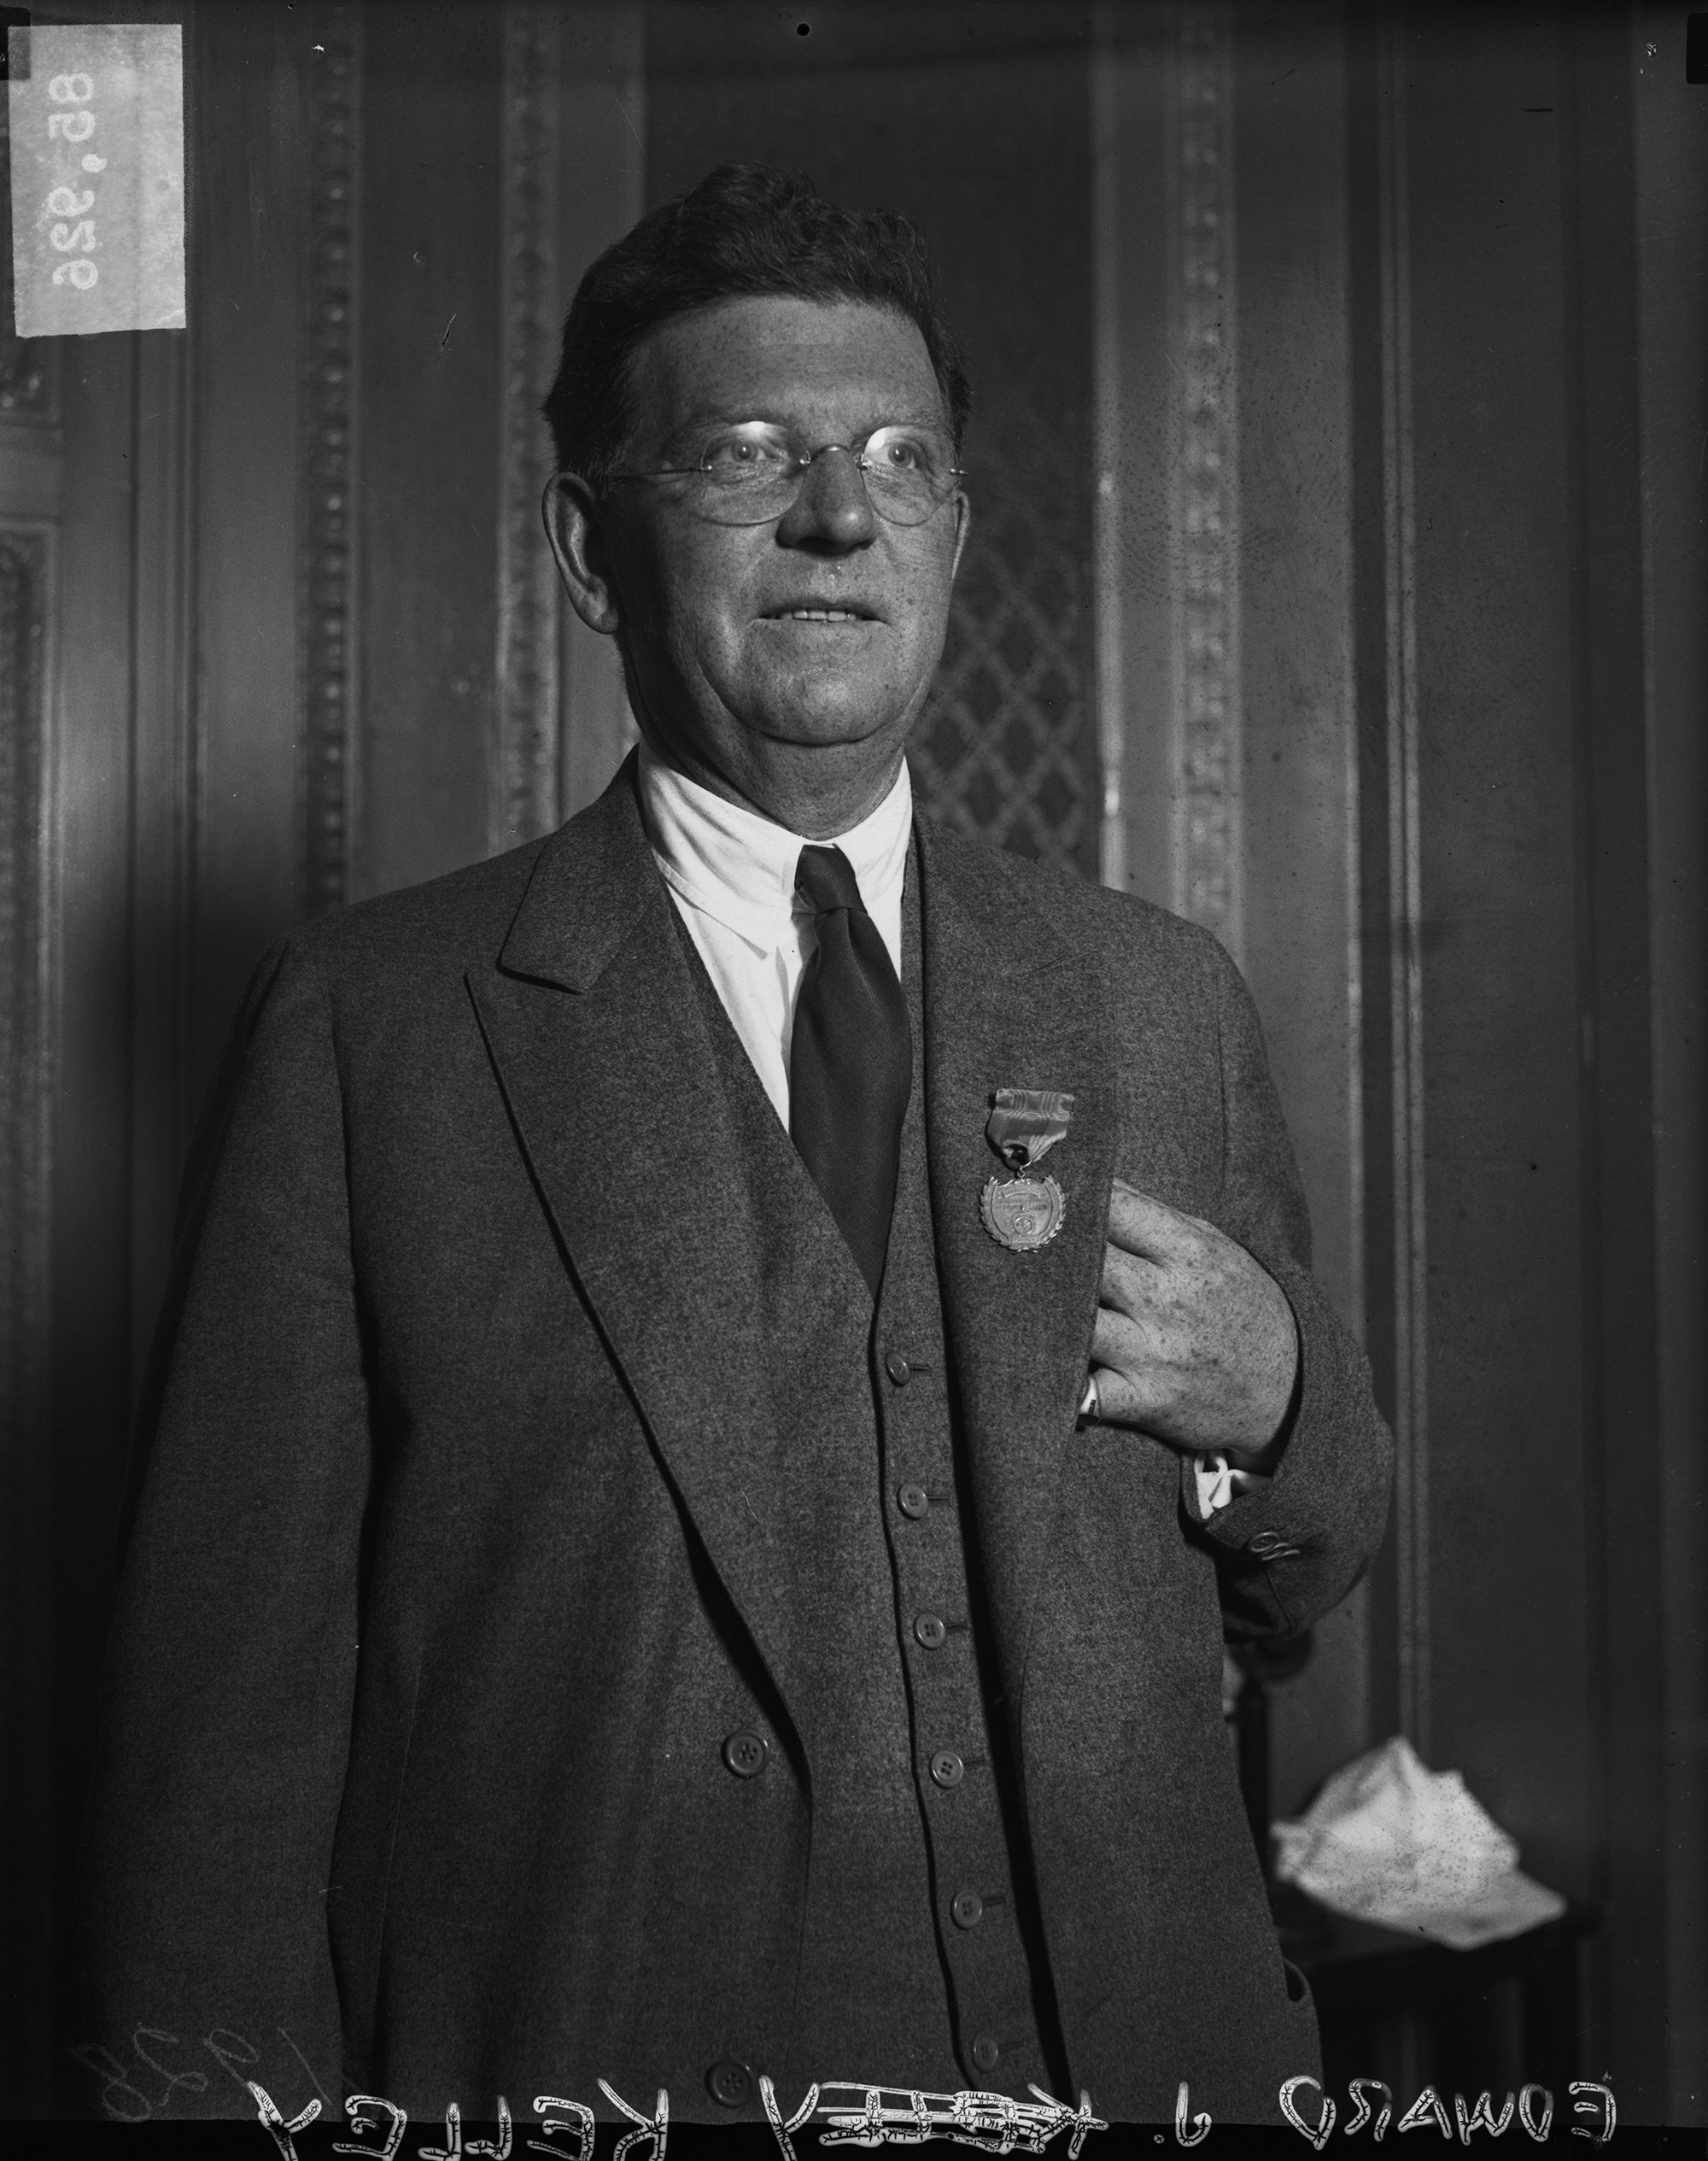 Half-length portrait of Chicago mayor Edward J. Kelly wearing a medal, standing in a room